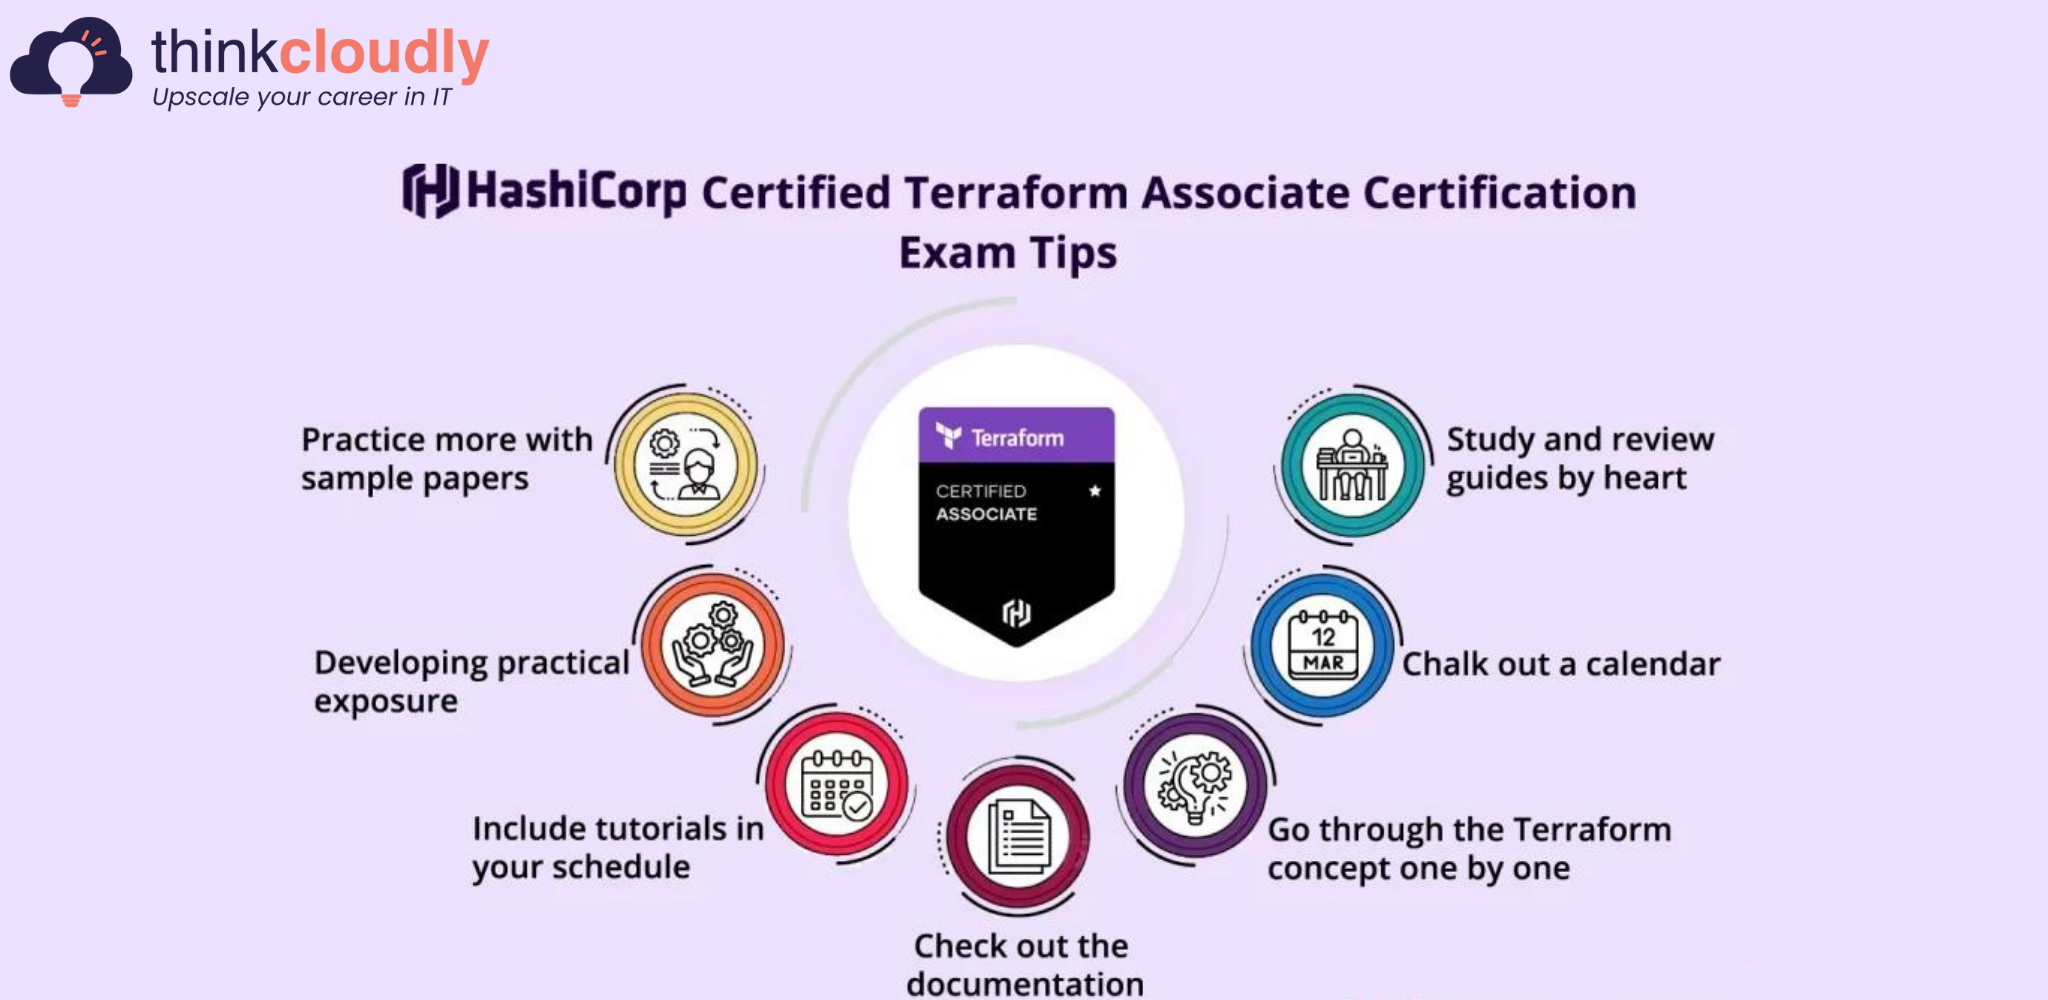 Hashicorp-Certified-Terraform-Associate-Study-Guide_Think-Cloudly